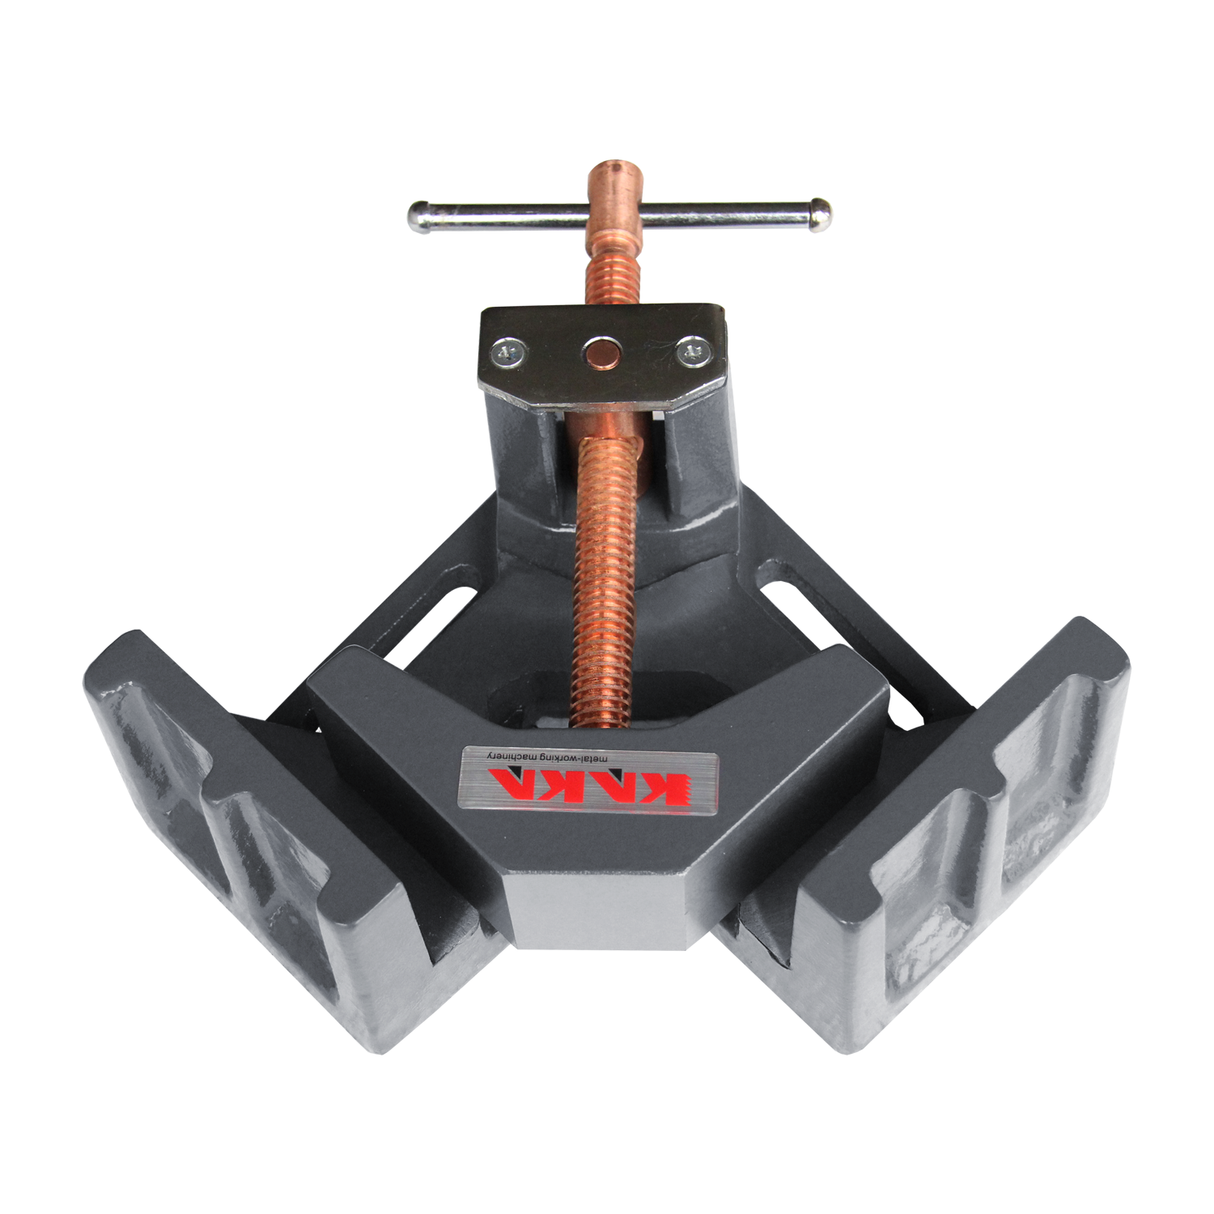 Lightweight and Easy to Operate Angle Clamp Vice - Perfect for DIY Enthusiasts and Professionals Alike